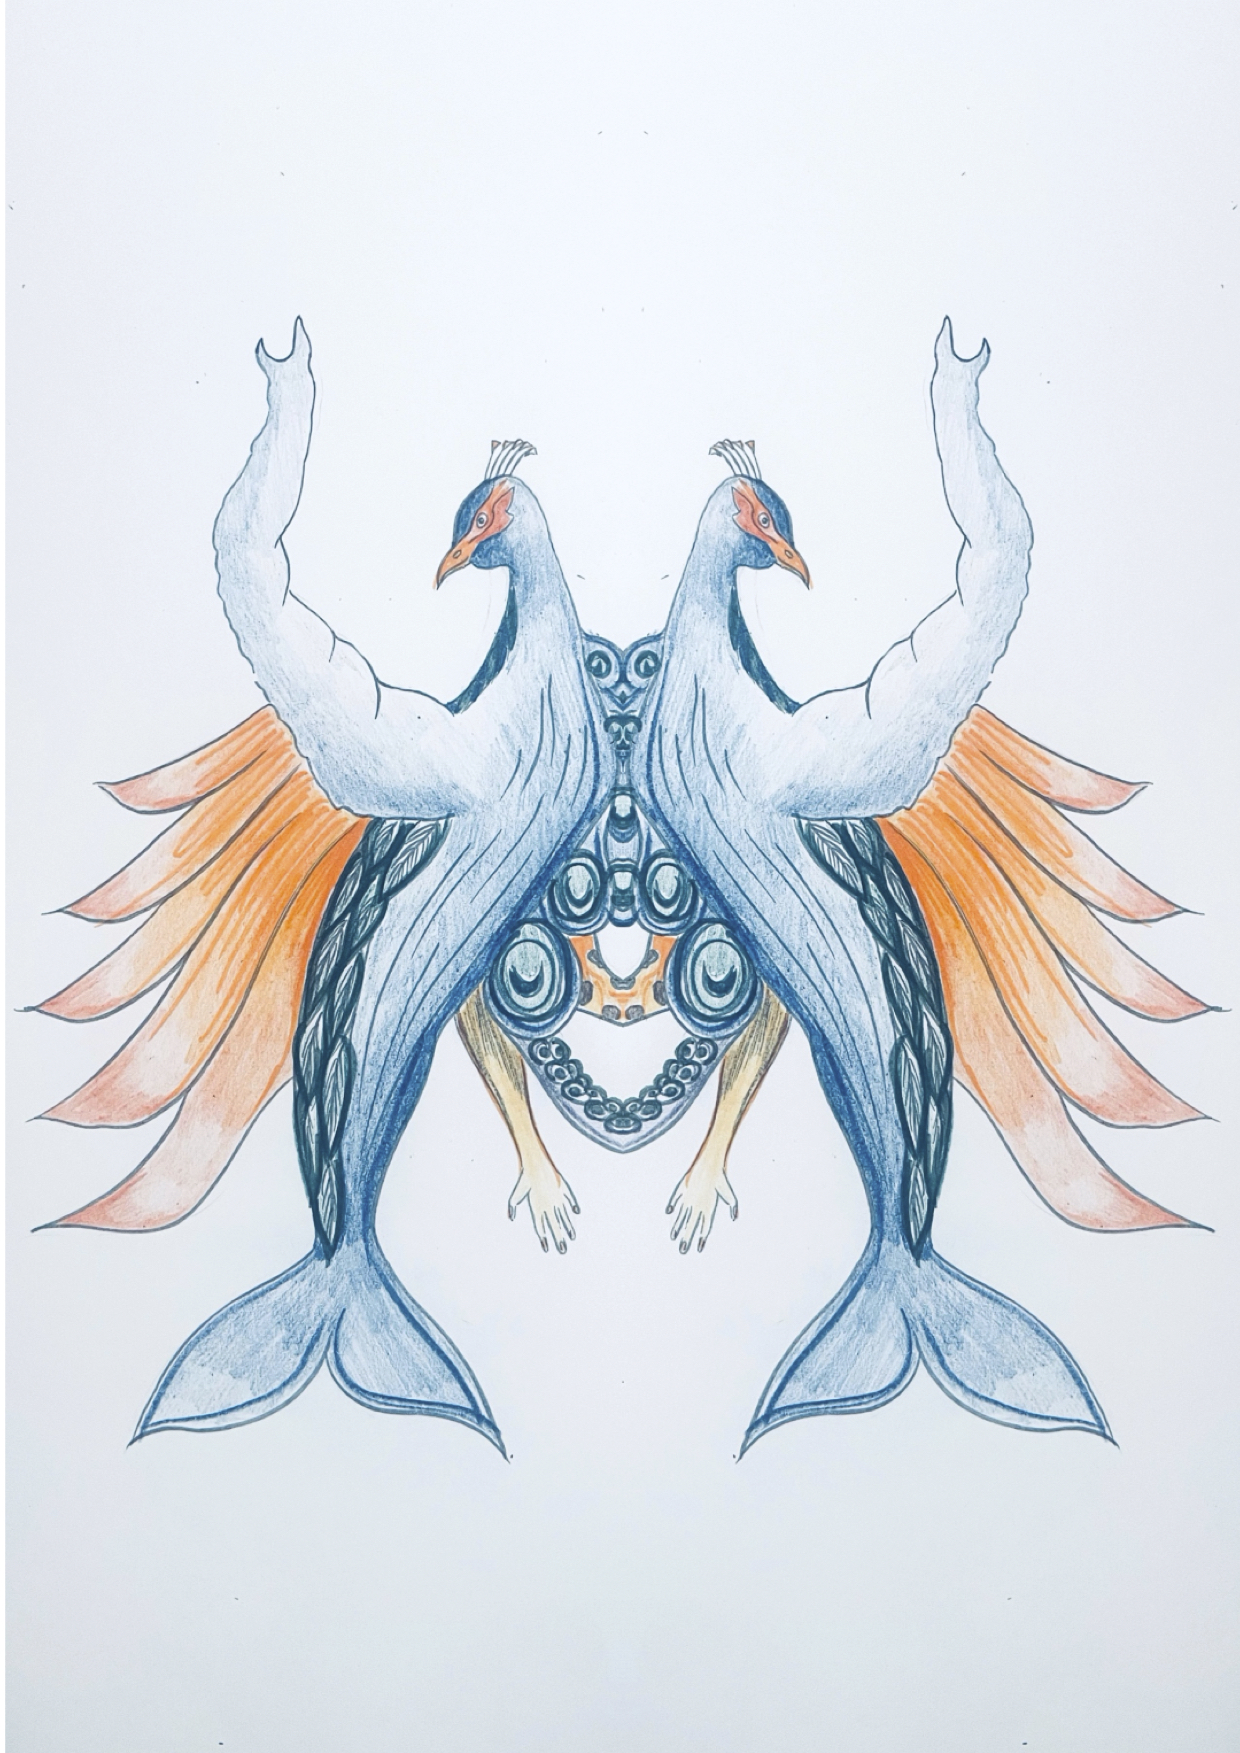 Drawing of mirrored creature with wings and tails